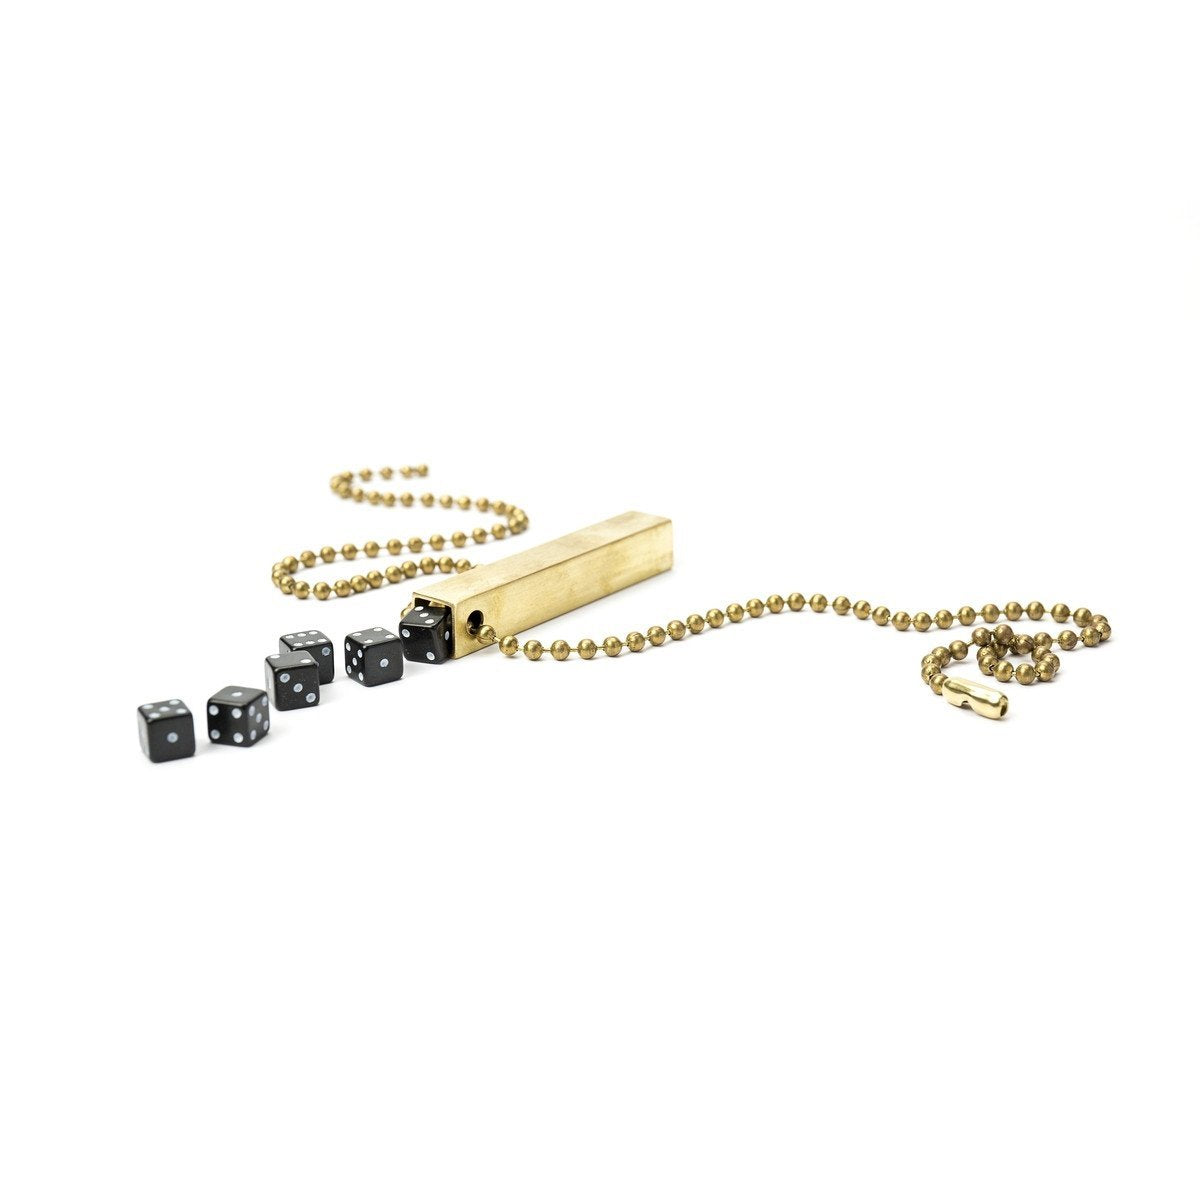 White background variant photo of brass travel dice with black dice and a necklace chain